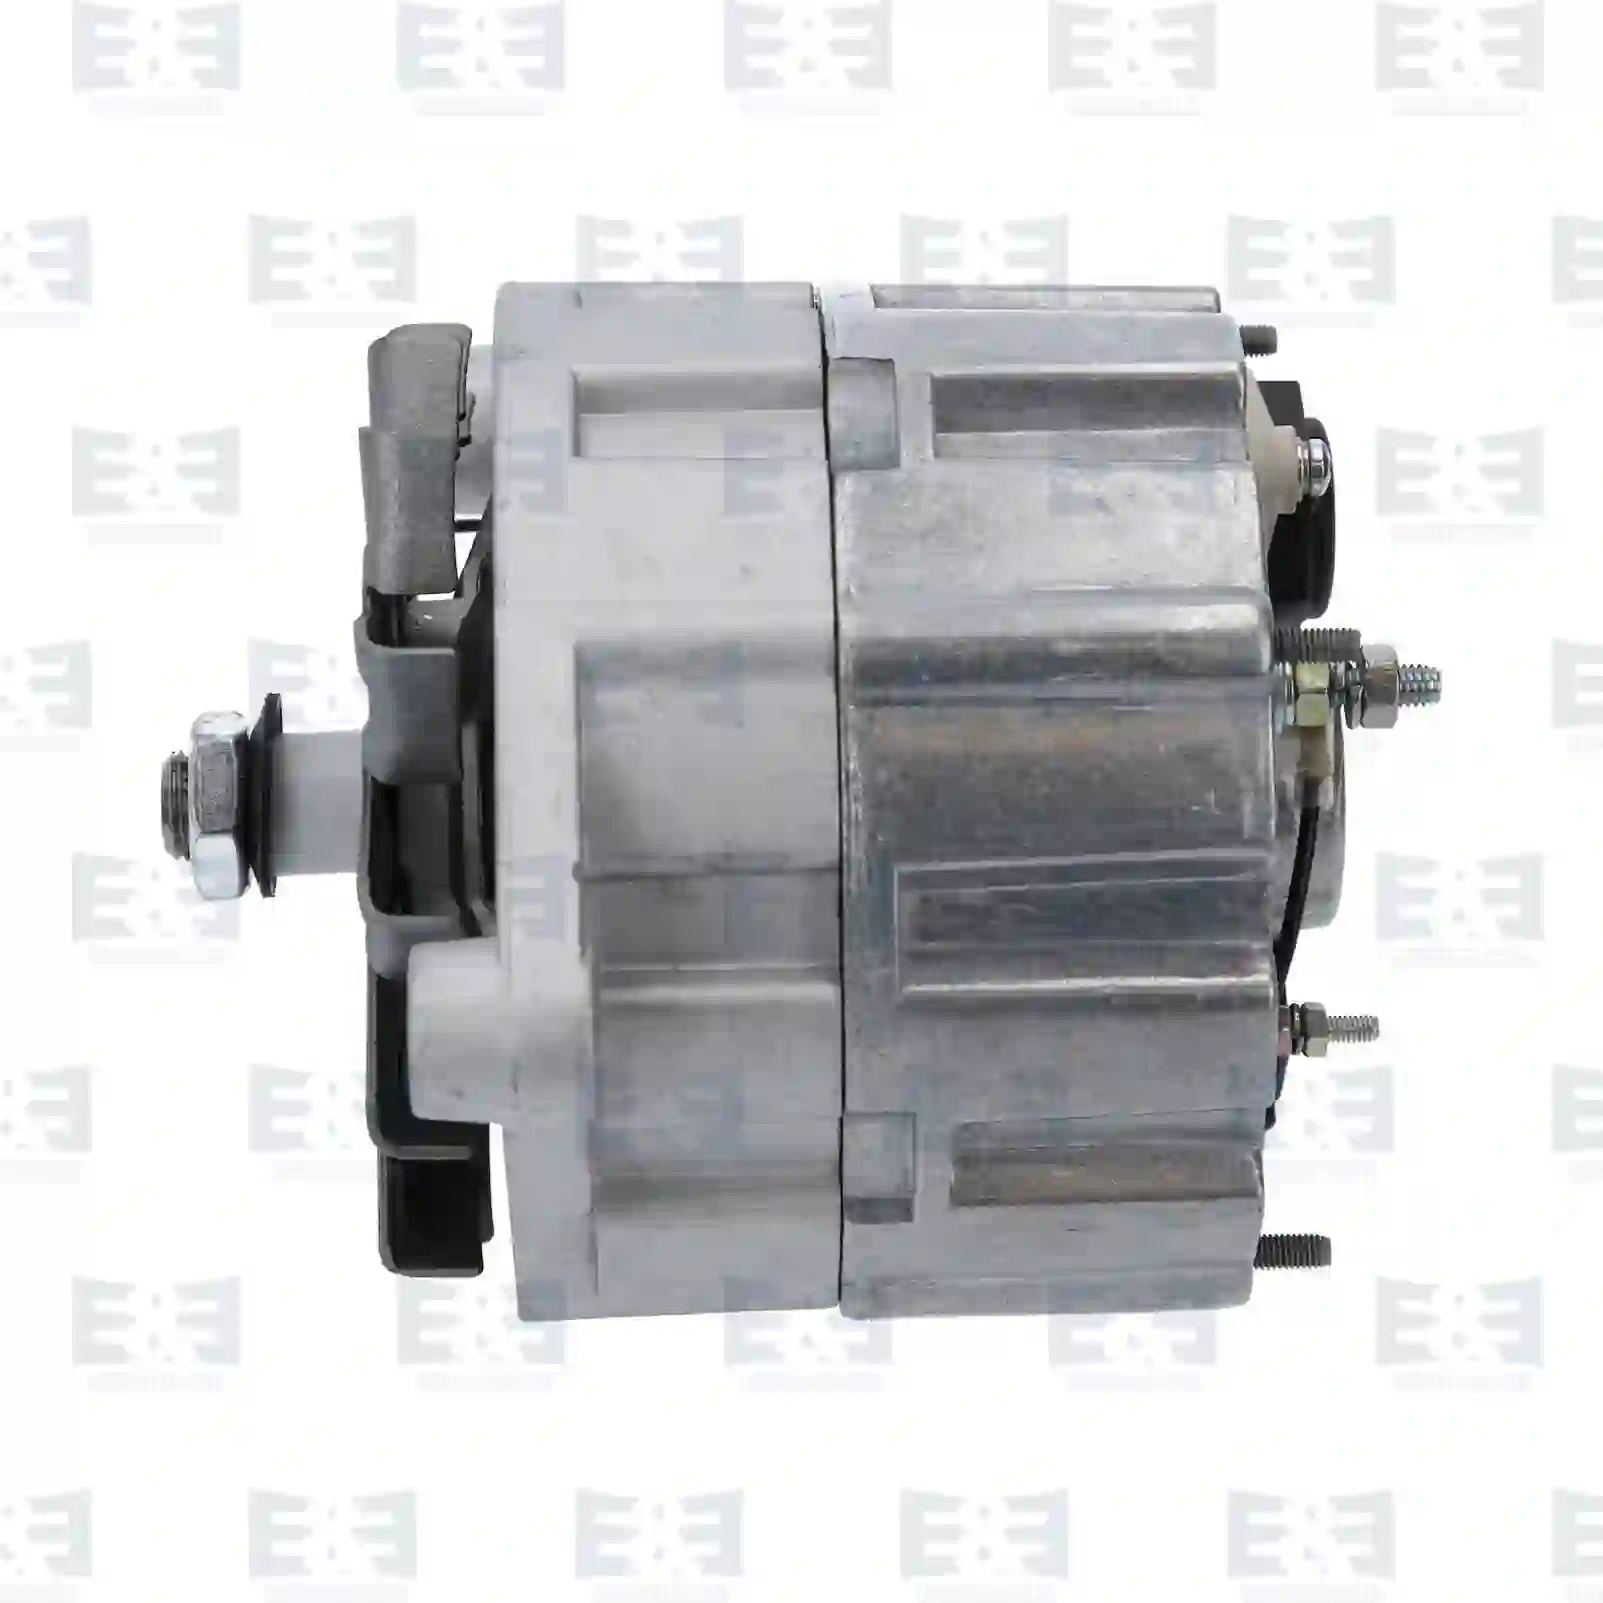 Alternator, 2E2290009, SA772, 1607361, 1624089, 21048164, 5003089, 85000219, 068903017R, 068903017RX, 068903029T, 068903031EX, 068903031G, 068903031GX, JFU903031A, JUF903031A ||  2E2290009 E&E Truck Spare Parts | Truck Spare Parts, Auotomotive Spare Parts Alternator, 2E2290009, SA772, 1607361, 1624089, 21048164, 5003089, 85000219, 068903017R, 068903017RX, 068903029T, 068903031EX, 068903031G, 068903031GX, JFU903031A, JUF903031A ||  2E2290009 E&E Truck Spare Parts | Truck Spare Parts, Auotomotive Spare Parts